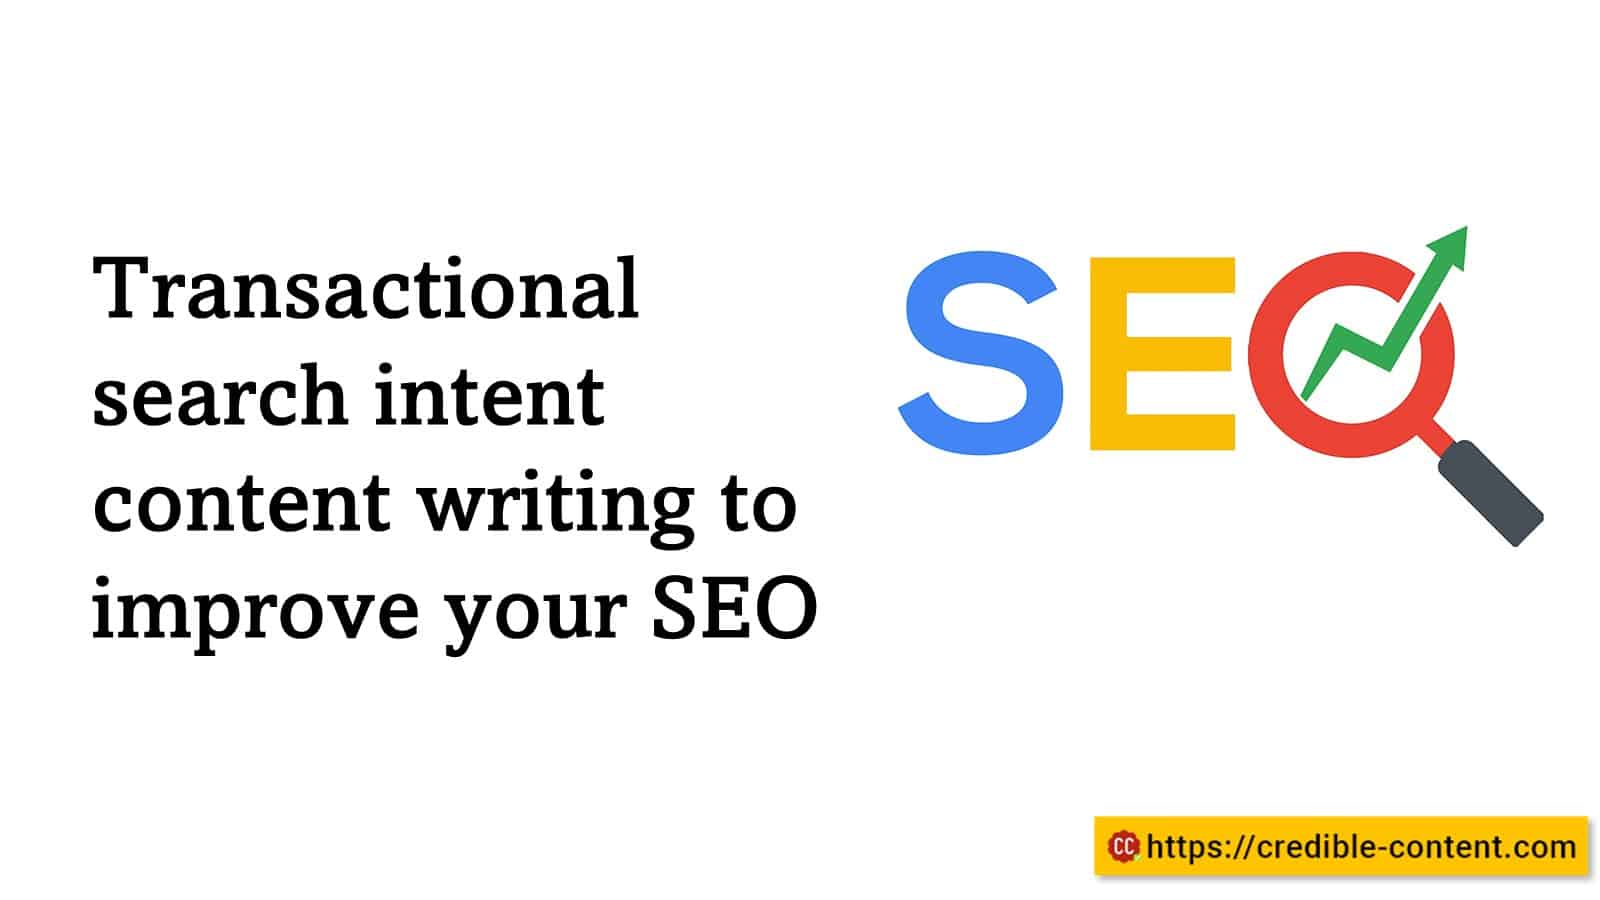 Transactional search intent content writing to improve your SEO